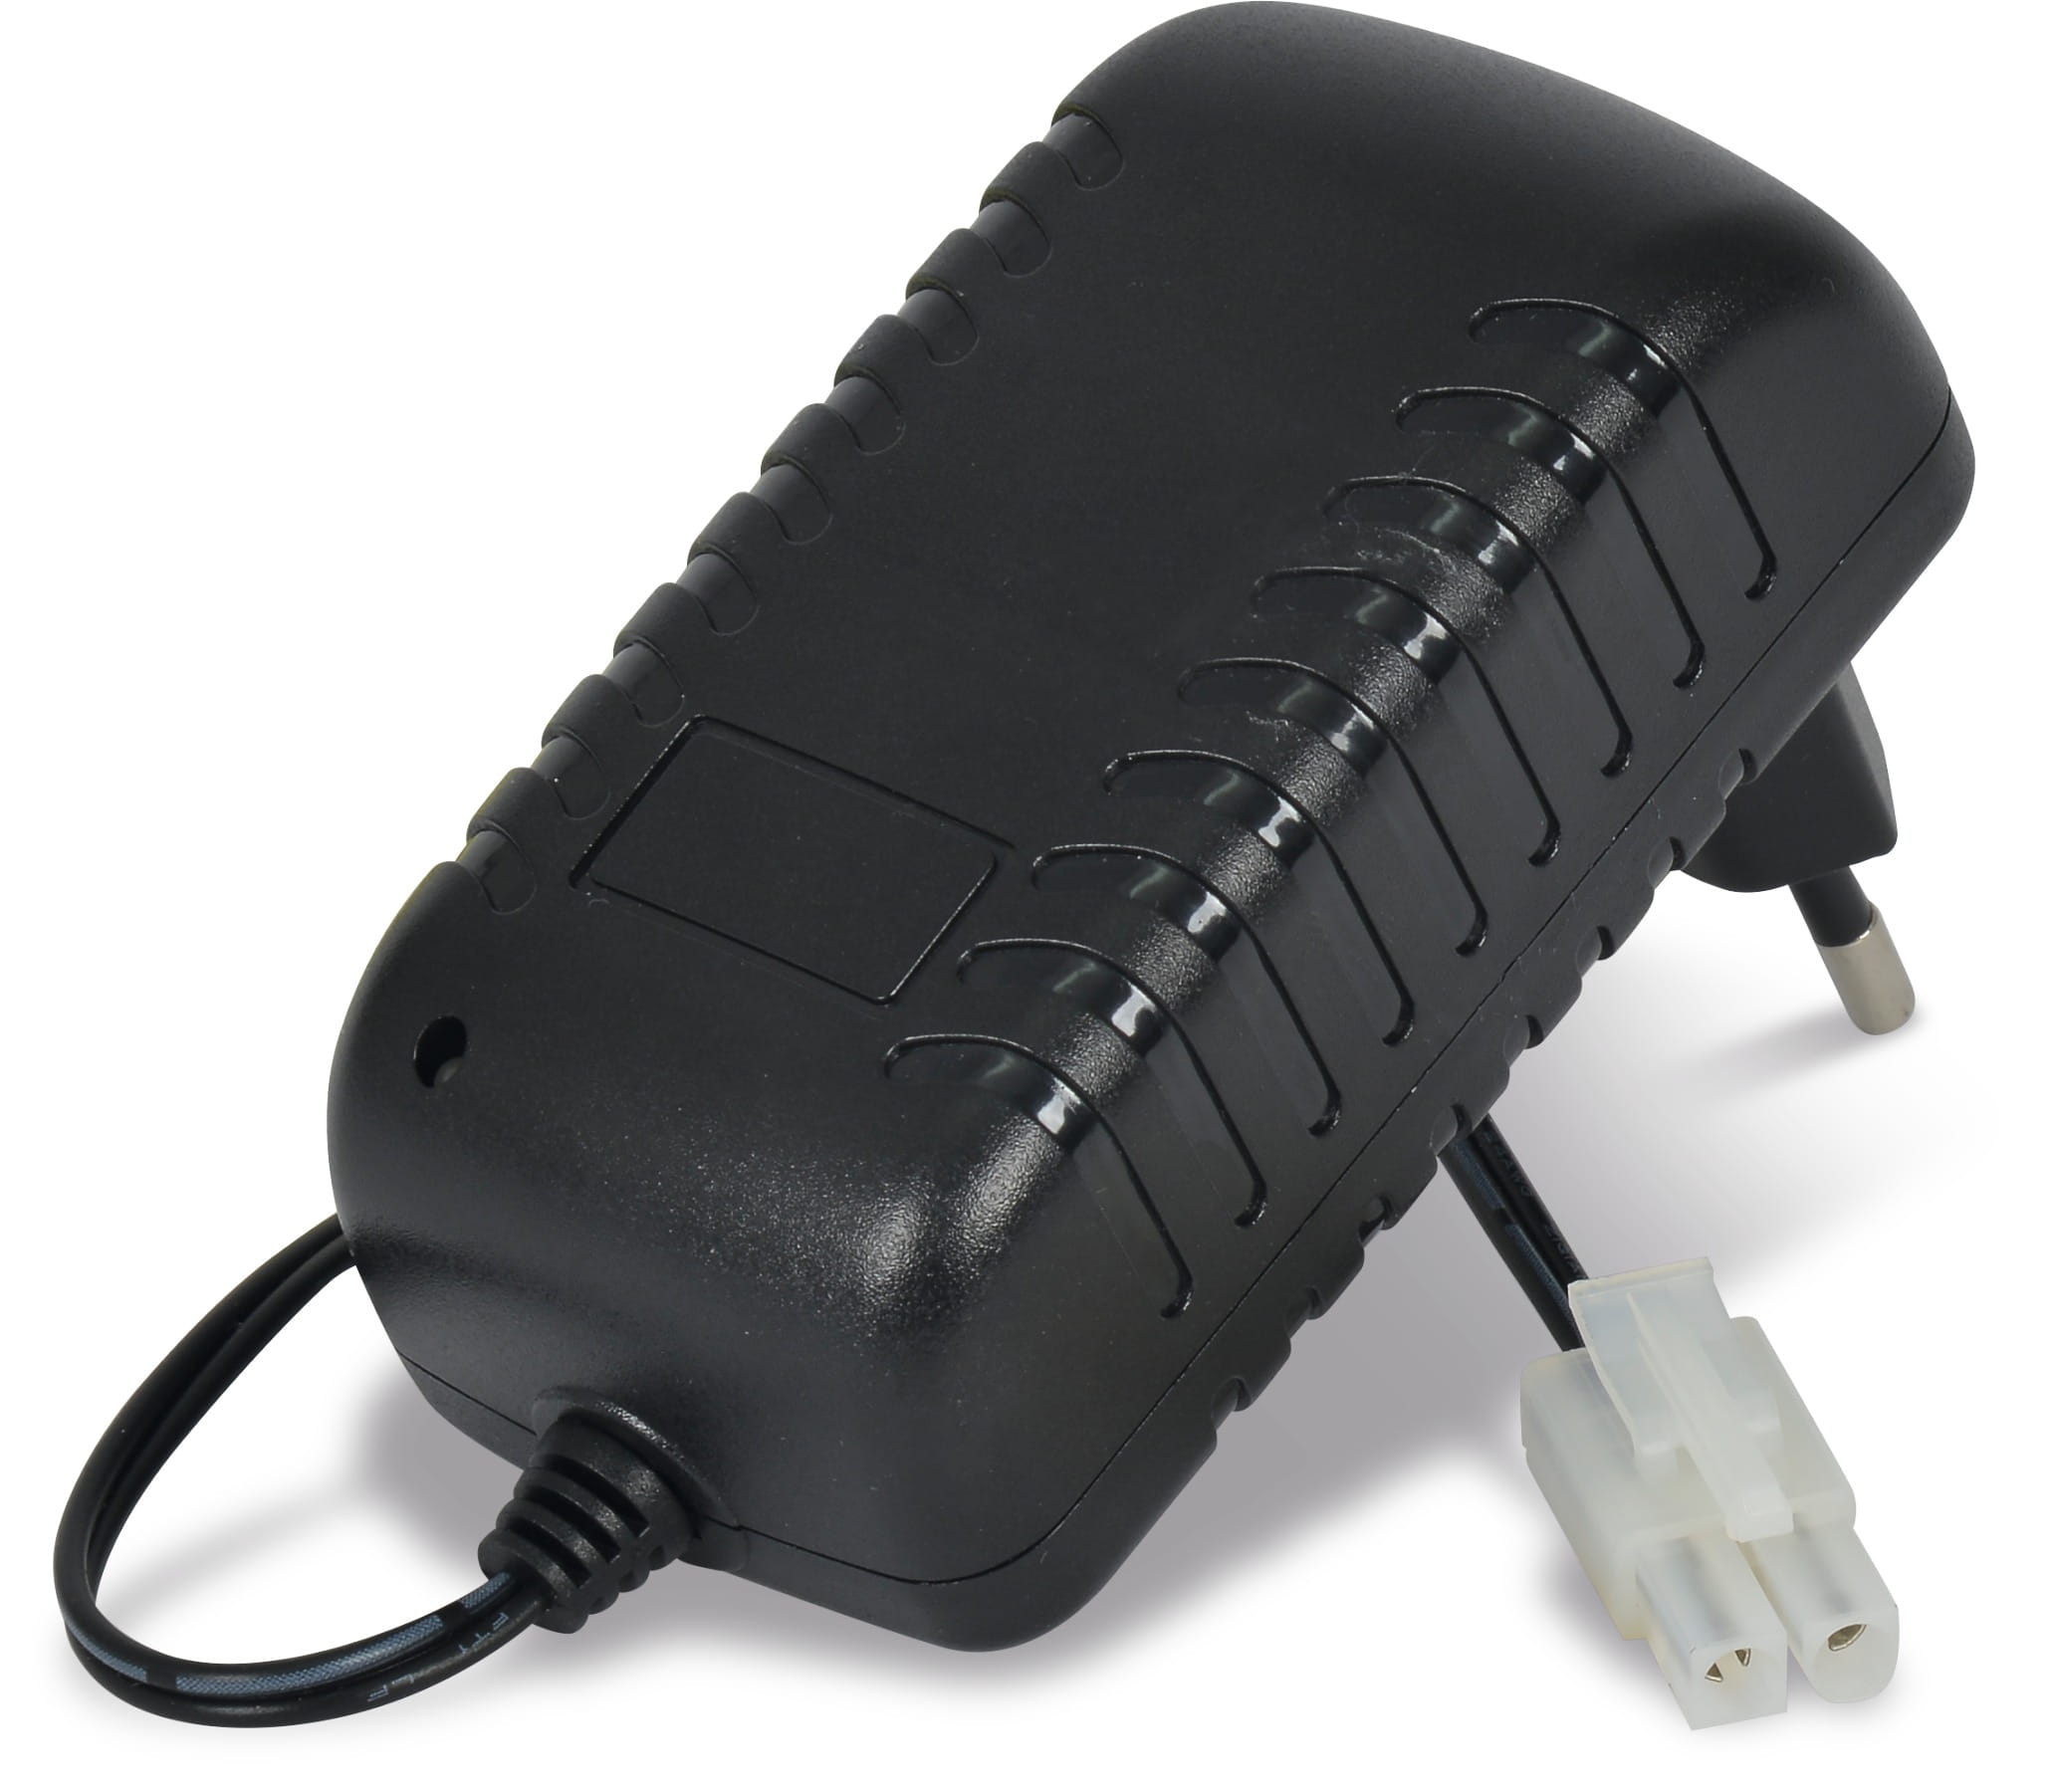 carson expert charger nimh